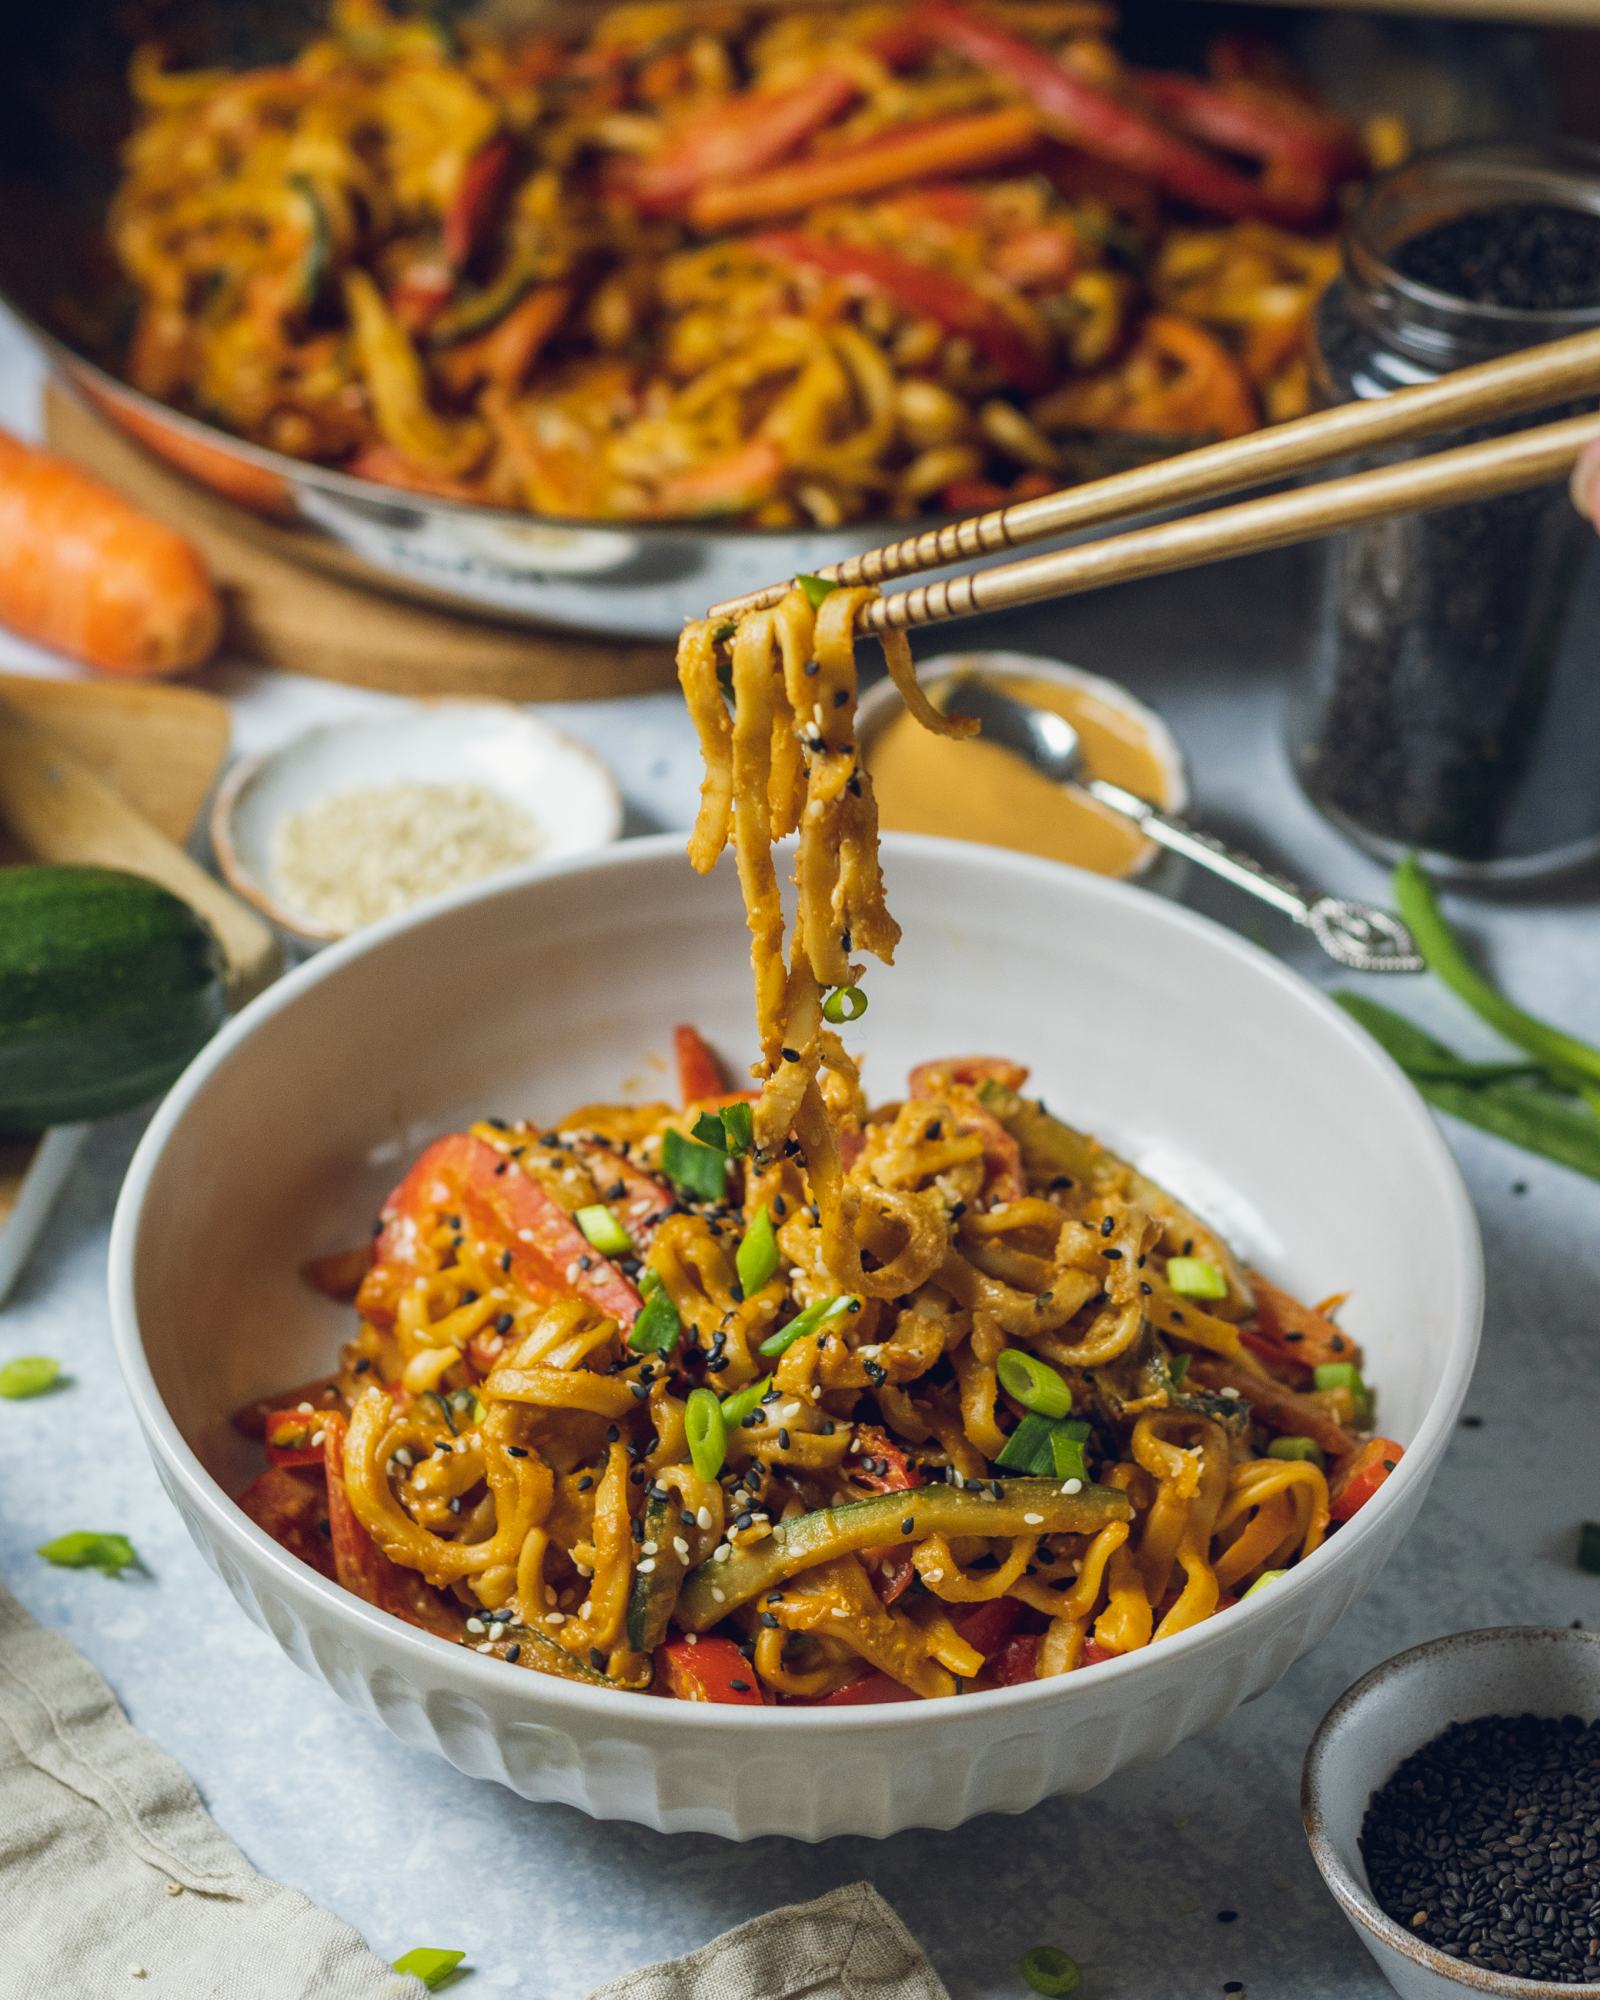 A white bowl filled with udon noodles in a creamy peanut sauce alongside peppers, zucchini and green onions can be seen on a dinner table surrounded by ingredients. Wooden chopsticks are picking up a portion of the noodles.